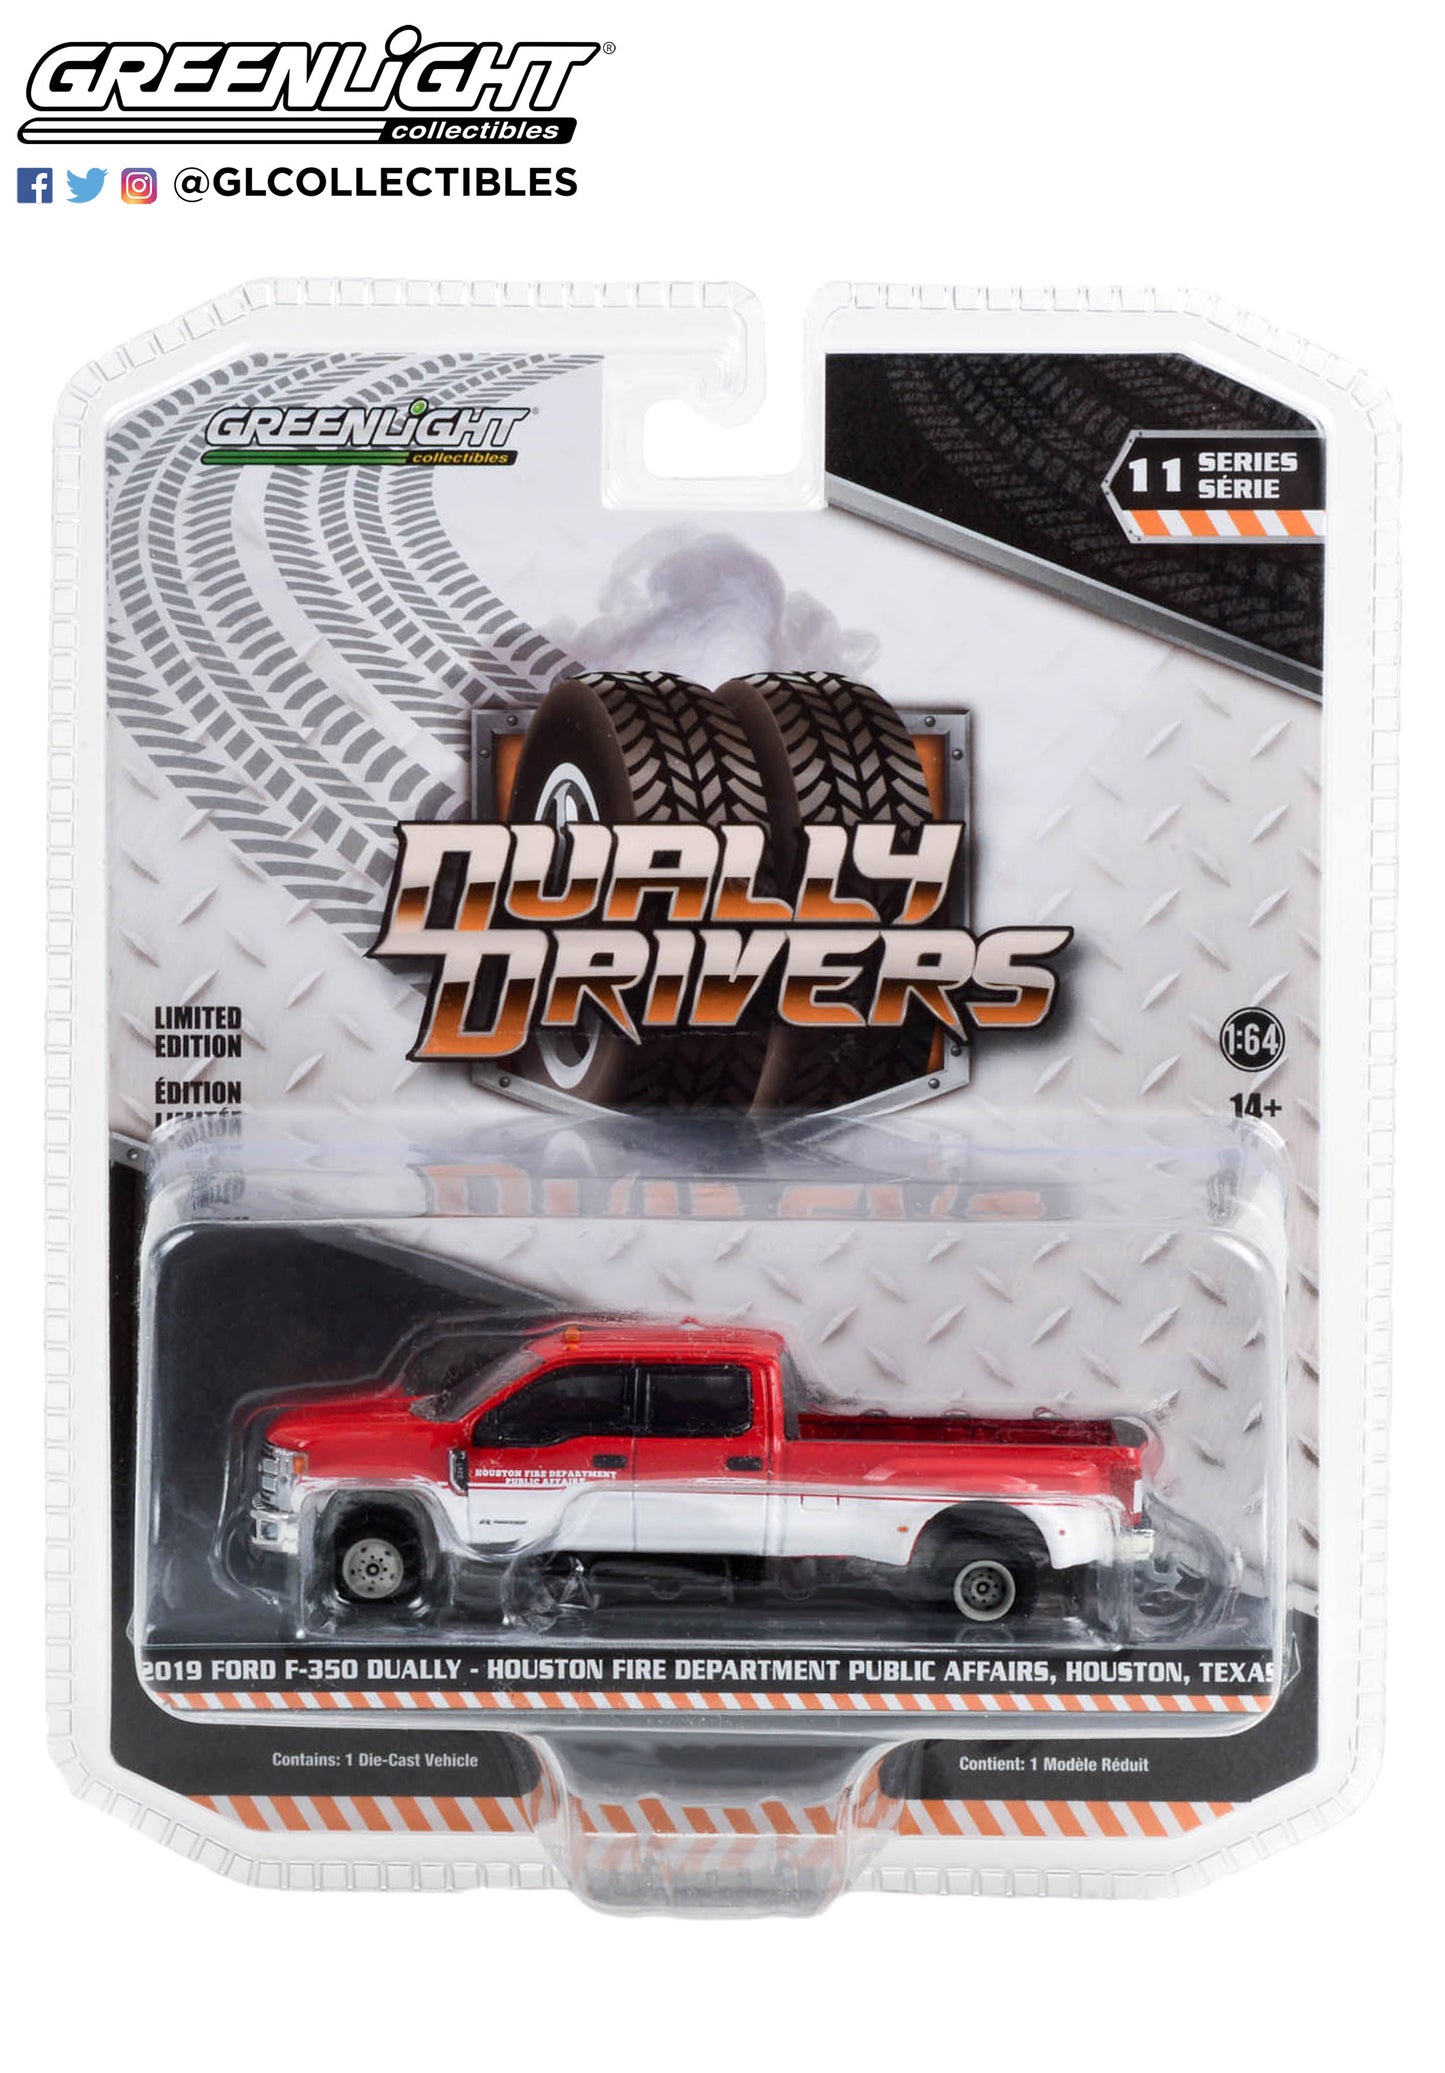 GreenLight 1:64 Dually Drivers Series 11 - 2019 Ford F-350 Dually - Houston Fire Department Public Affairs, Houston, Texas 46110-D